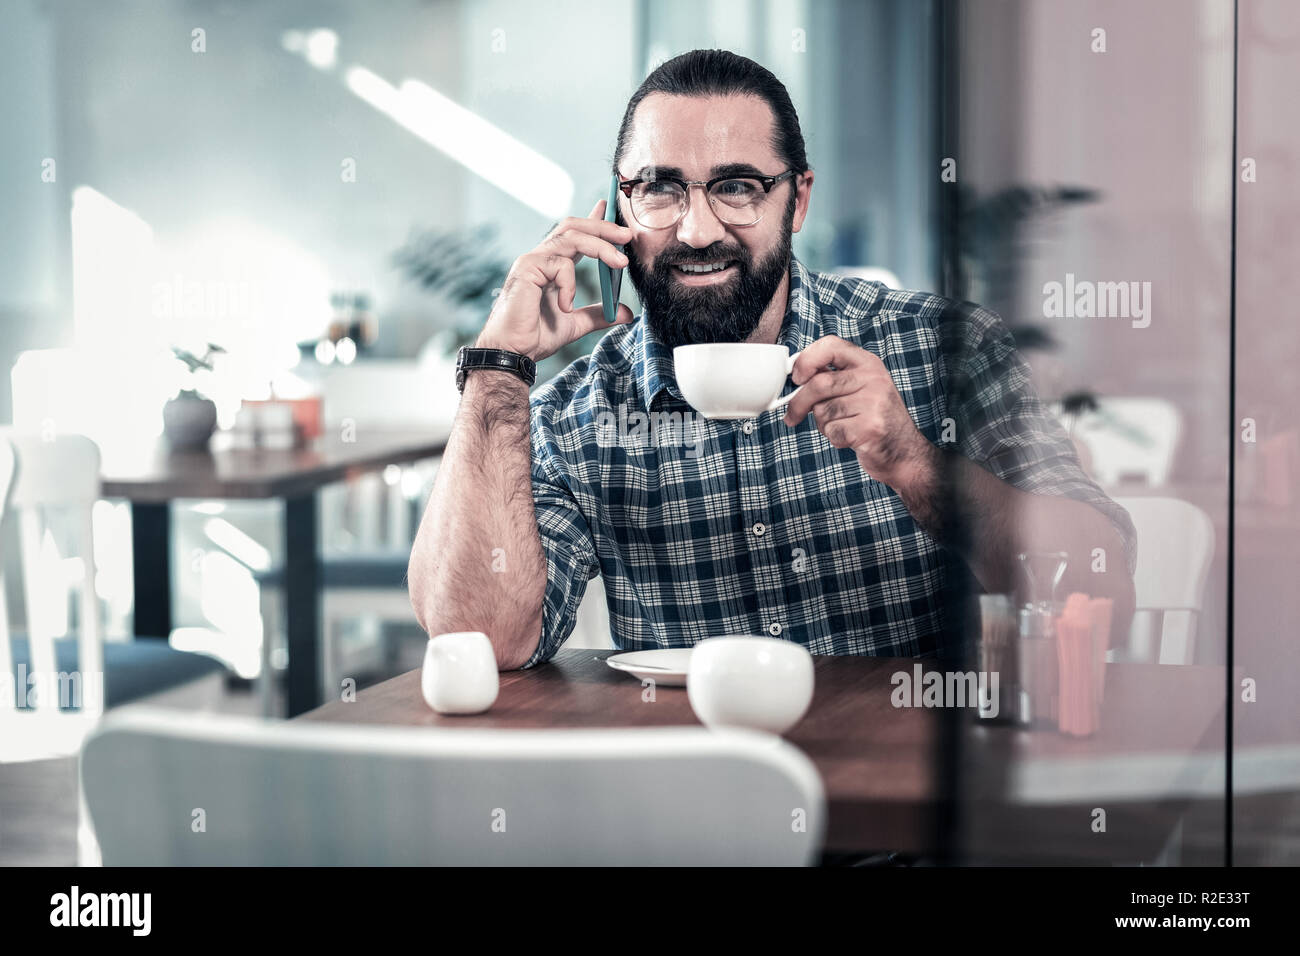 Dark-eyed man wearing squared shirt holding white cup of coffee Stock Photo